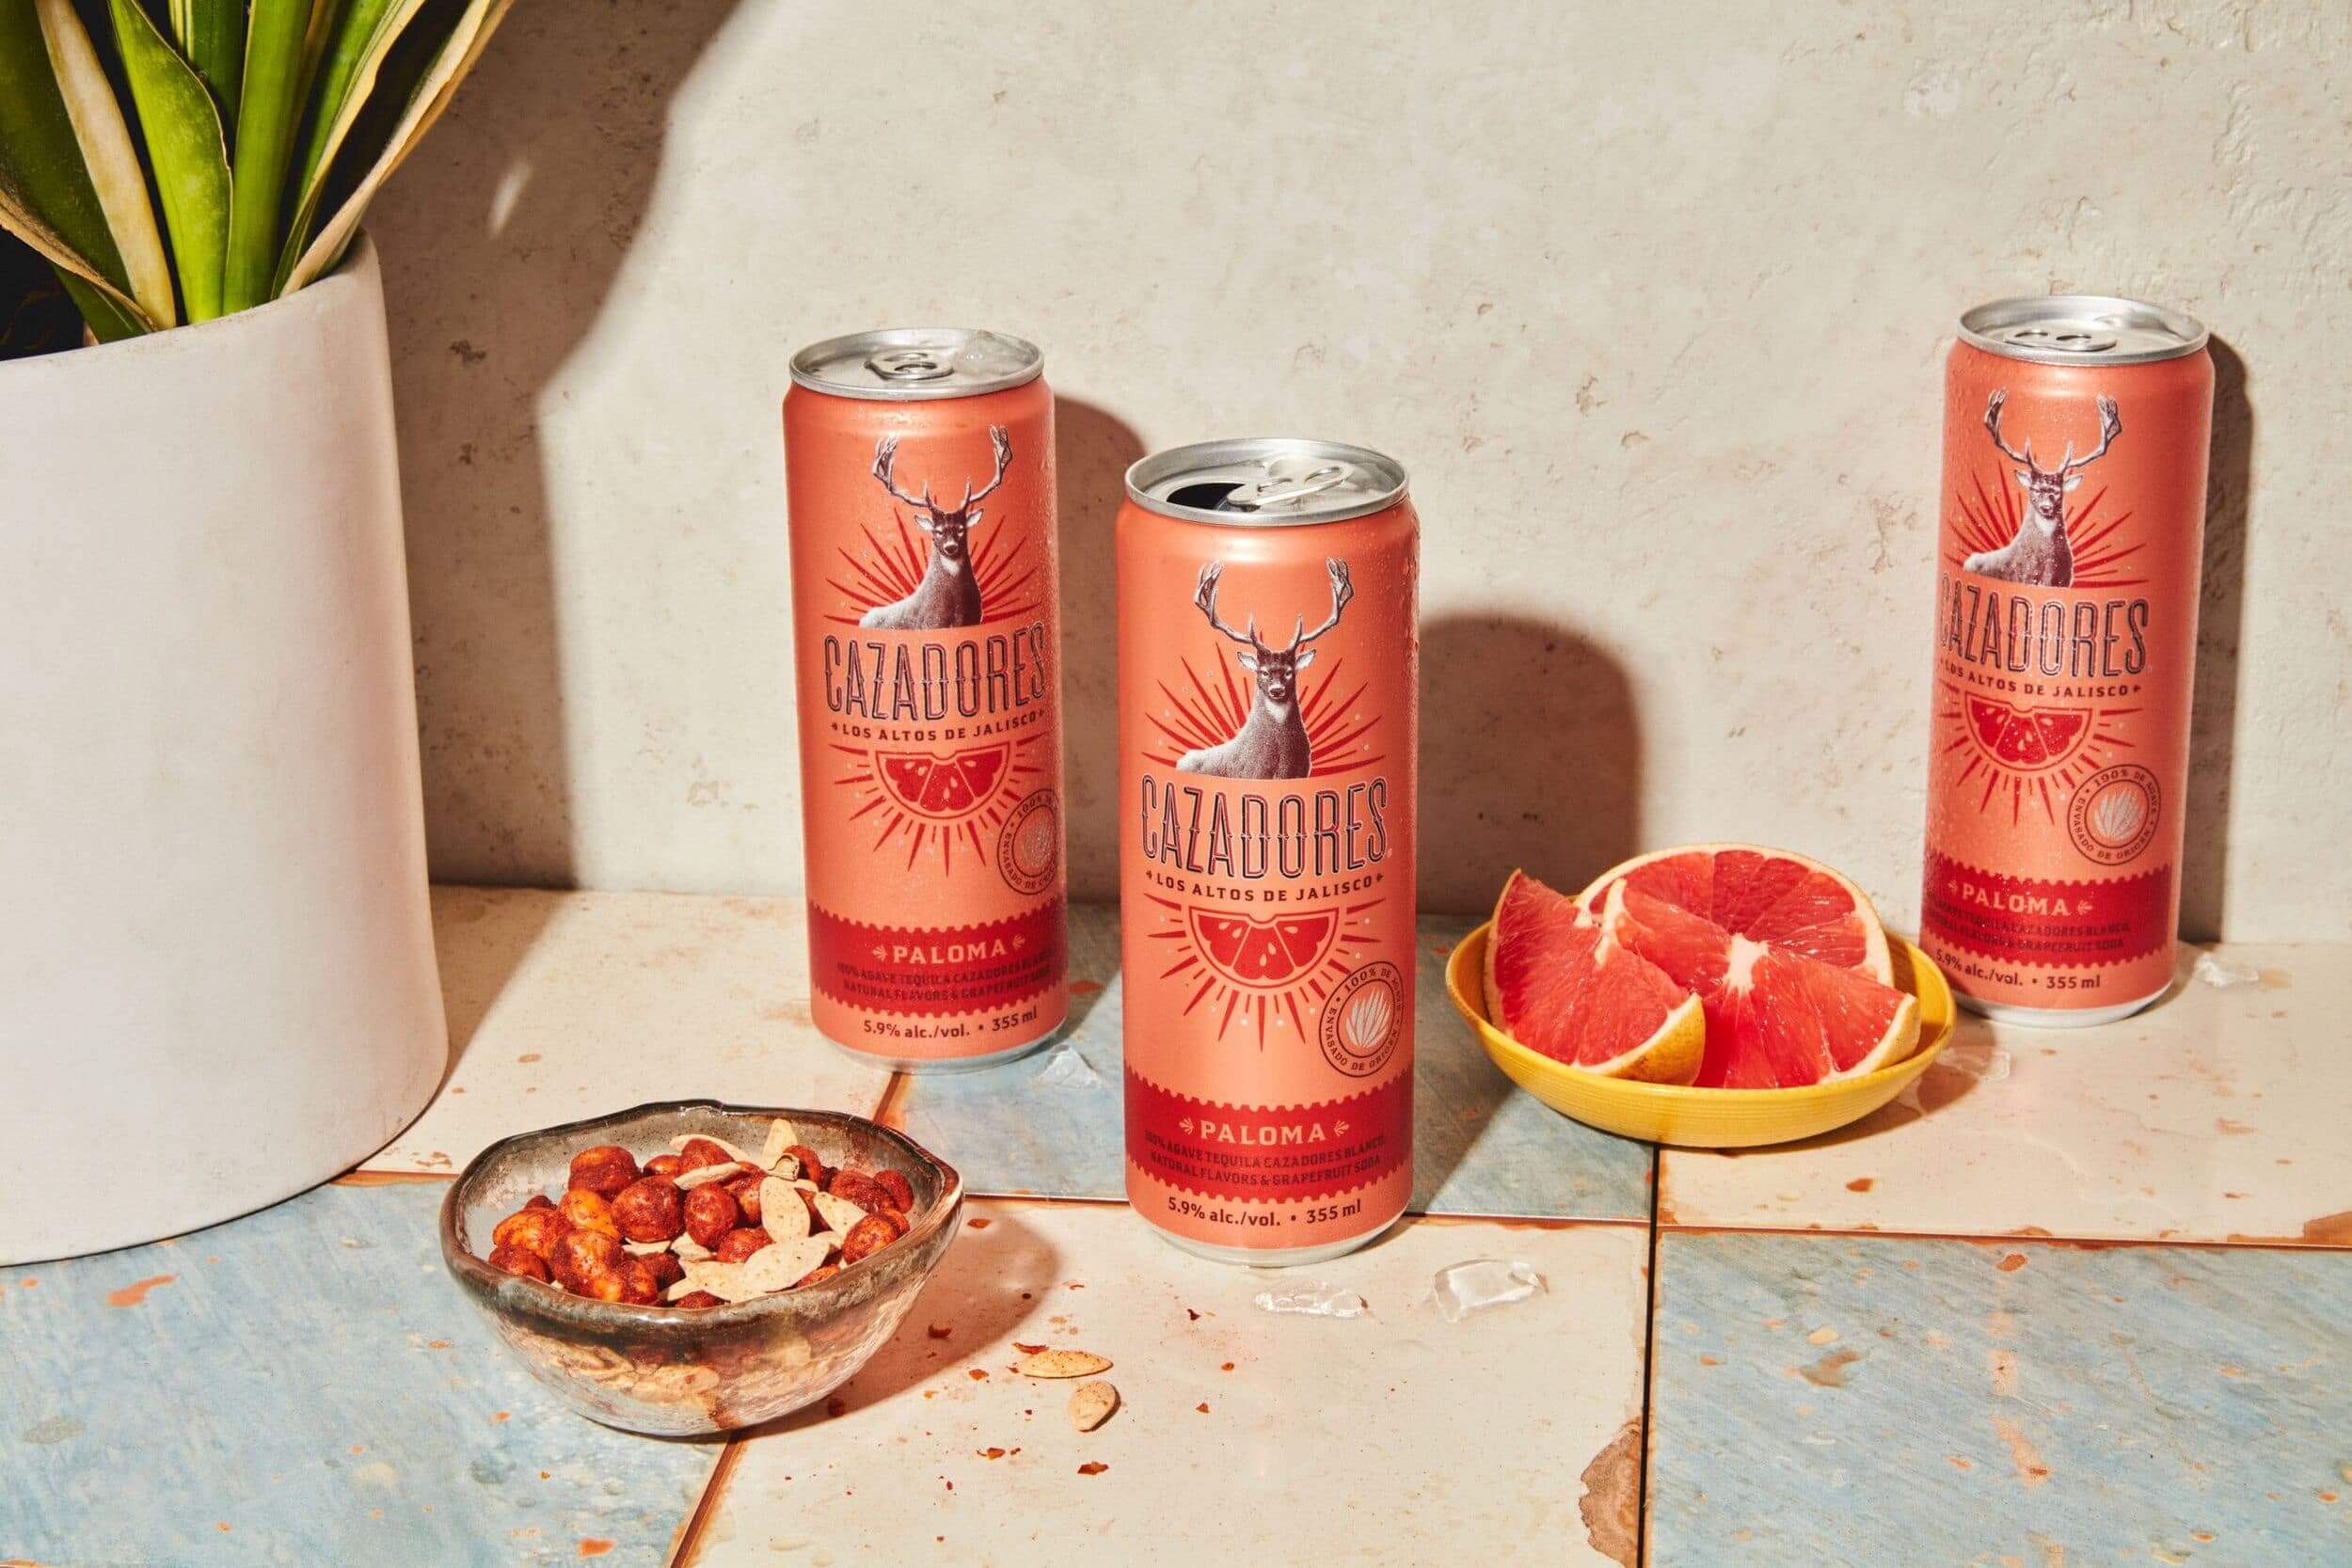 Two pink cans sitting on tiles with grapefruit pieces